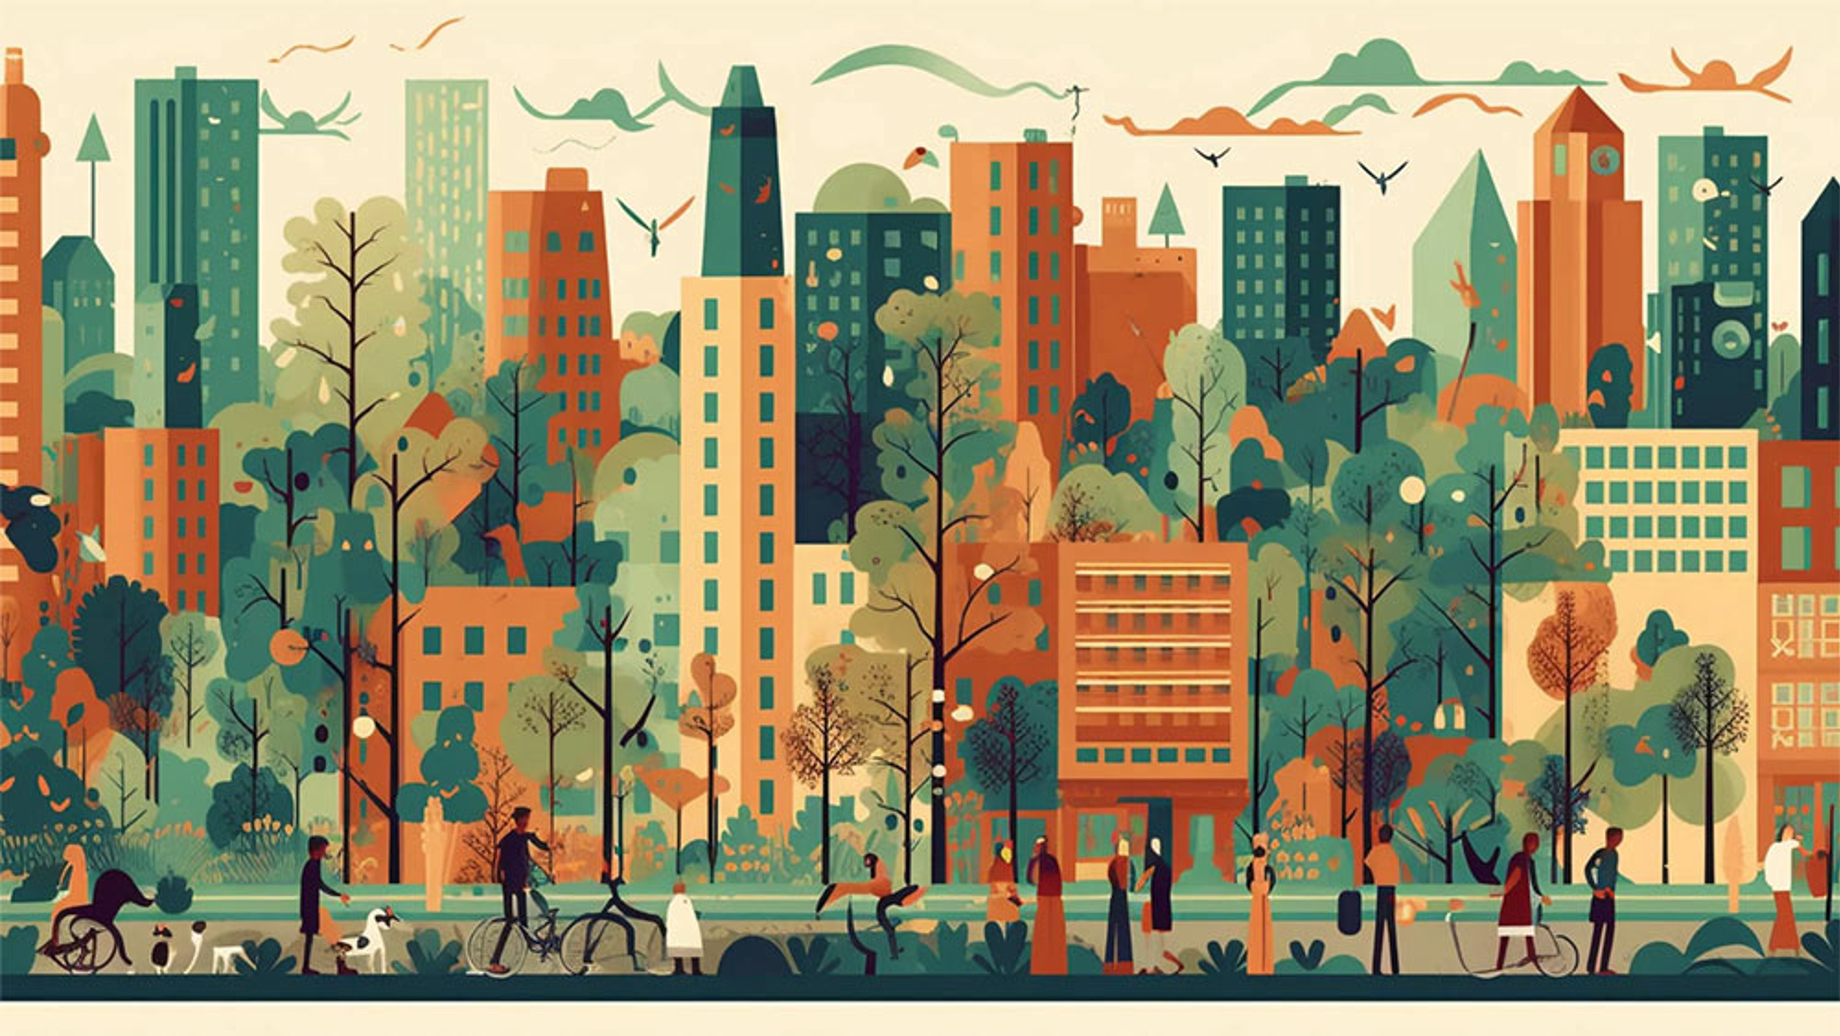 How do we develop nature-based cities